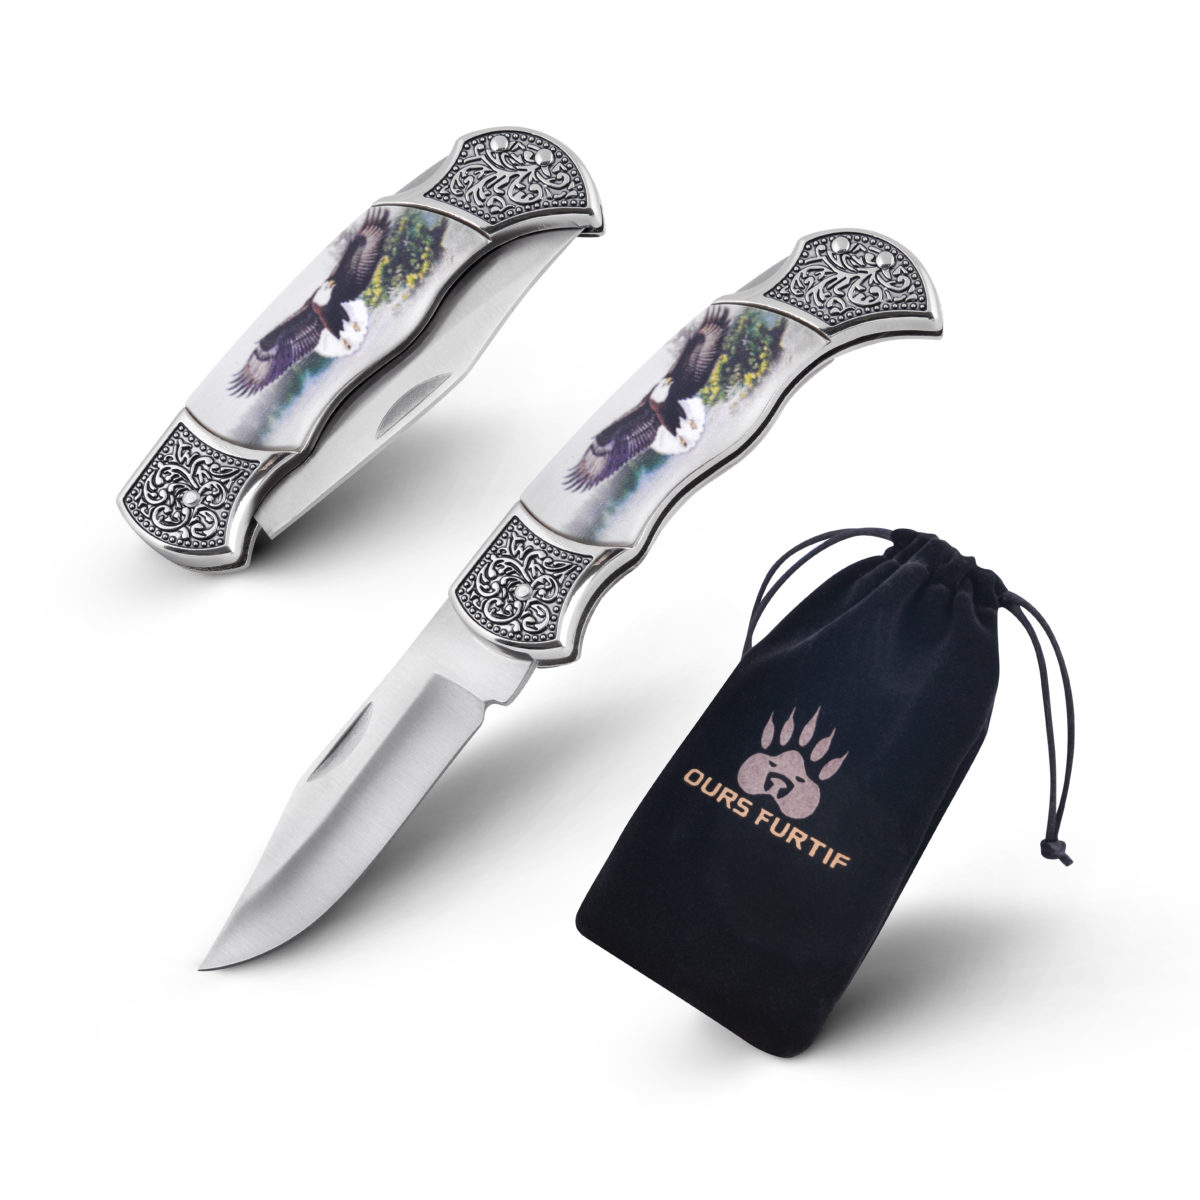 eagle folding knife with pouch